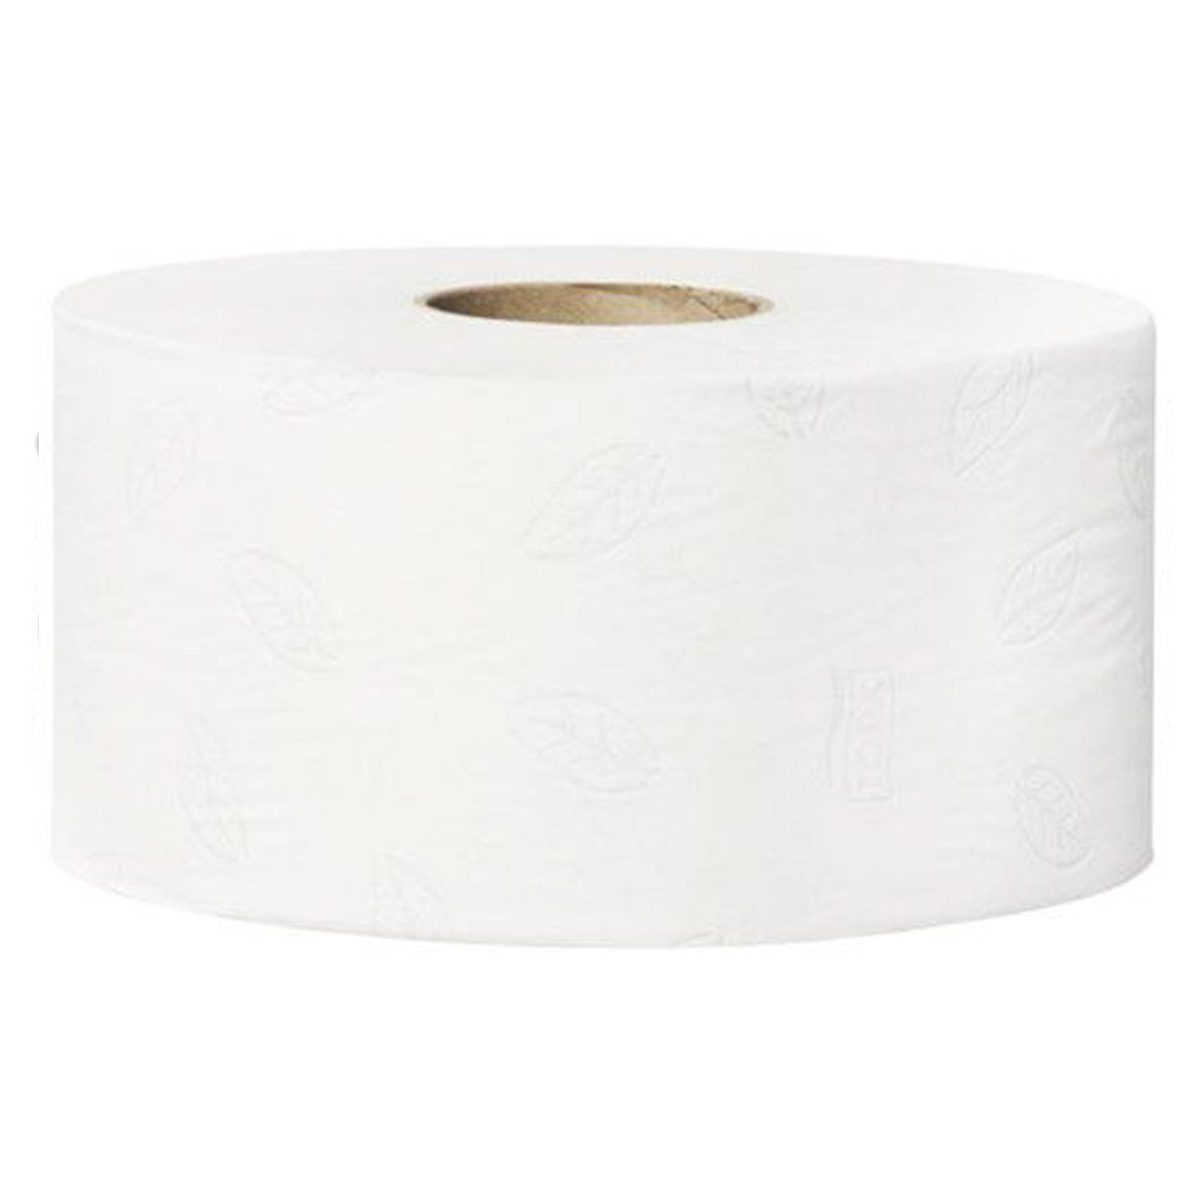 paper-products-toilet-paper-tork-toilet-paper-mini-jumbo-recycled-2ply-170m-12-rolls-t2-time-efficiency-reduced-cost-suitable-medium-to-high-traffic-locations-vjs-distributors-120280